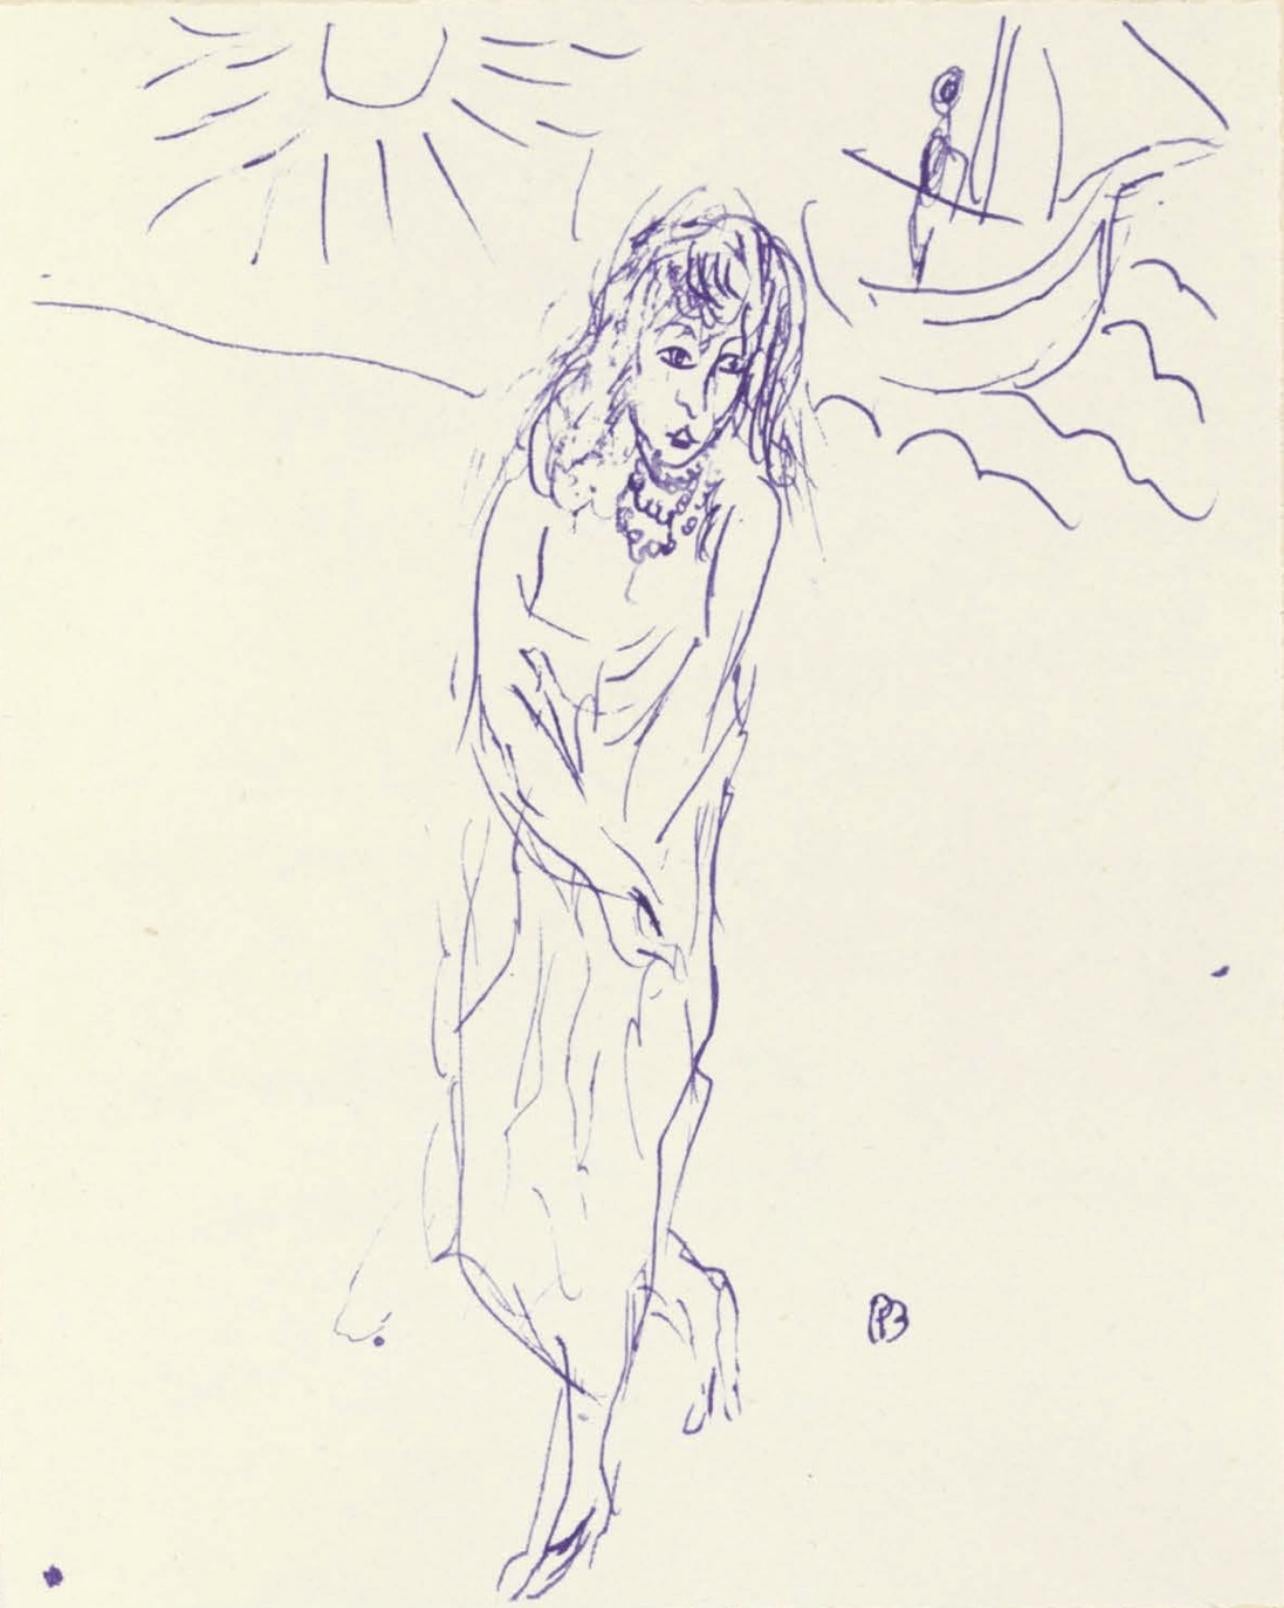 Lithograph on Velin d'Arches paper, mounted on supporting sheet by the publisher, as issued. Inscription: Signed in the plate and unnumbered, as issued. Good condition. Notes: From the volume, Correspondences Pierre Bonnard, 1944. Published by